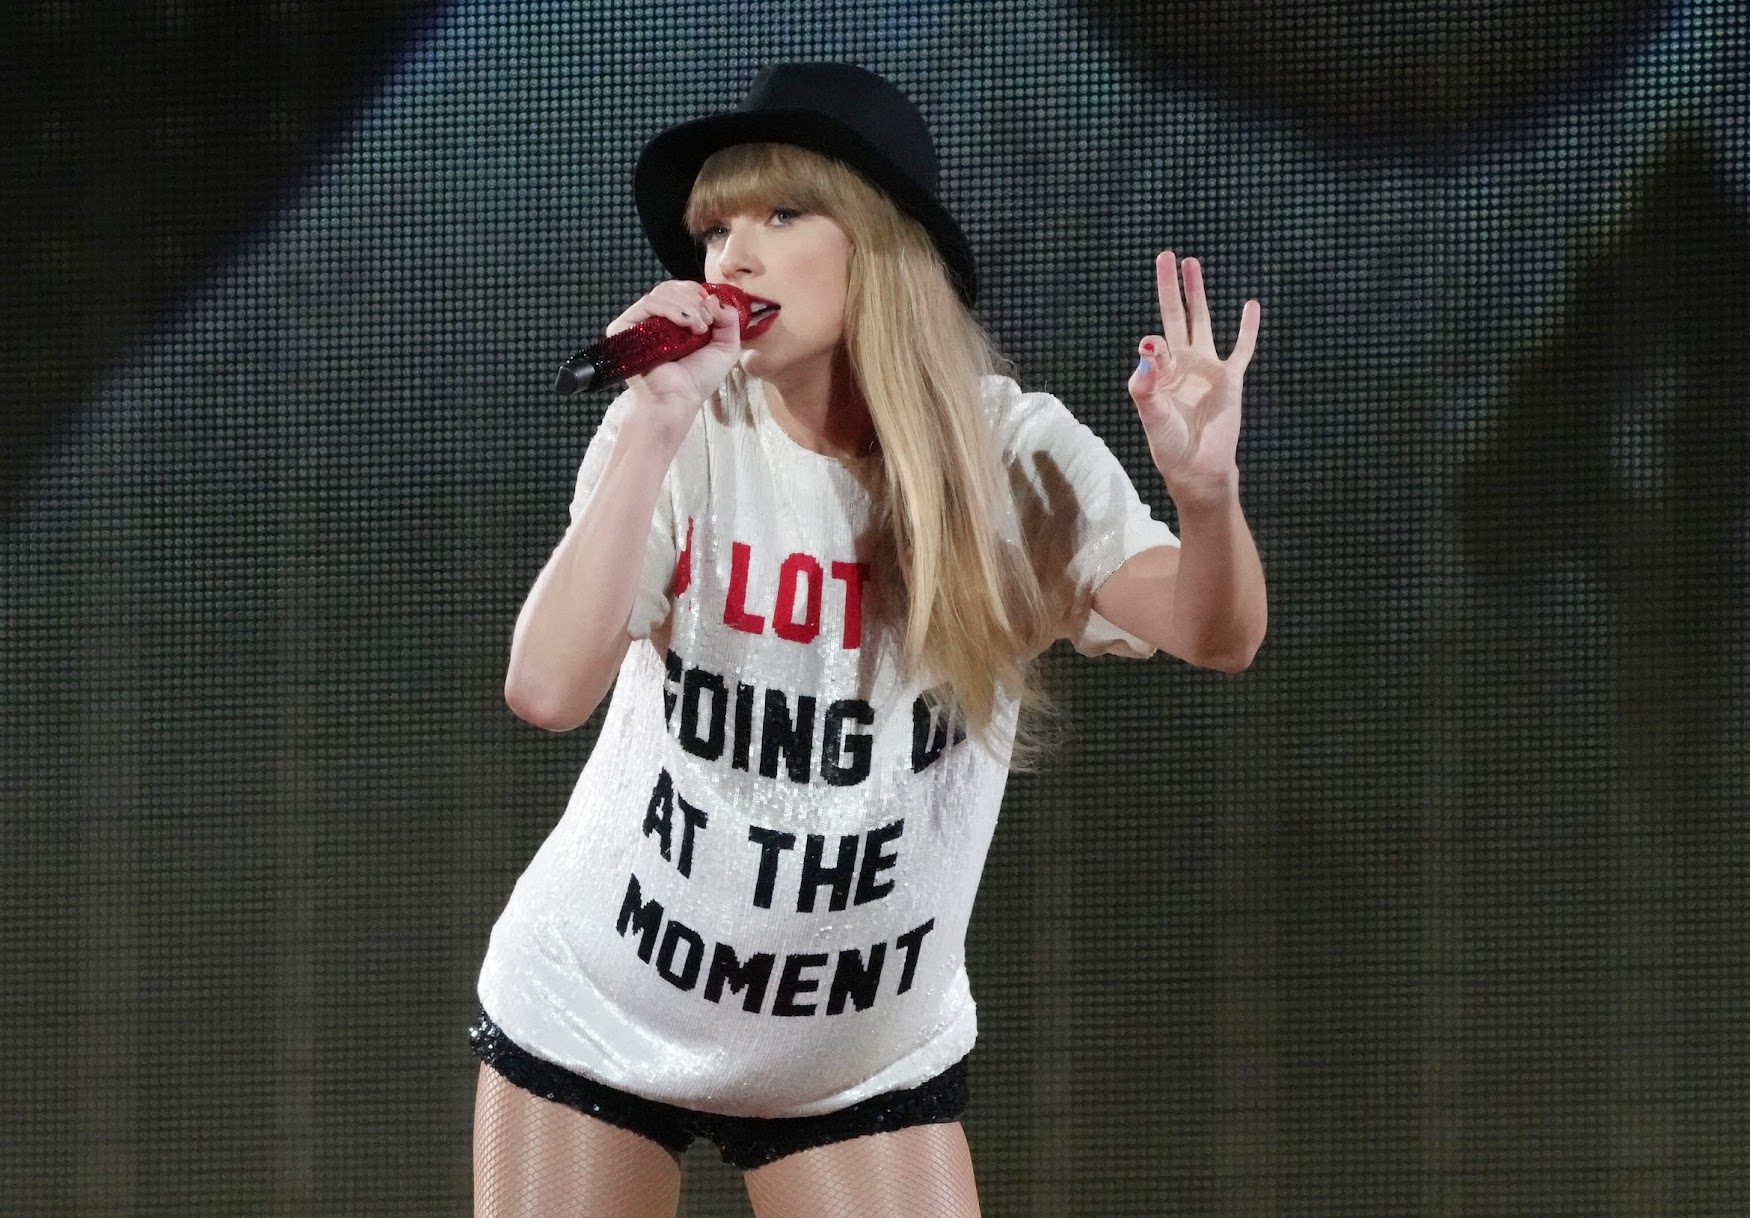 Taylor swift on stage in her 22 outfit